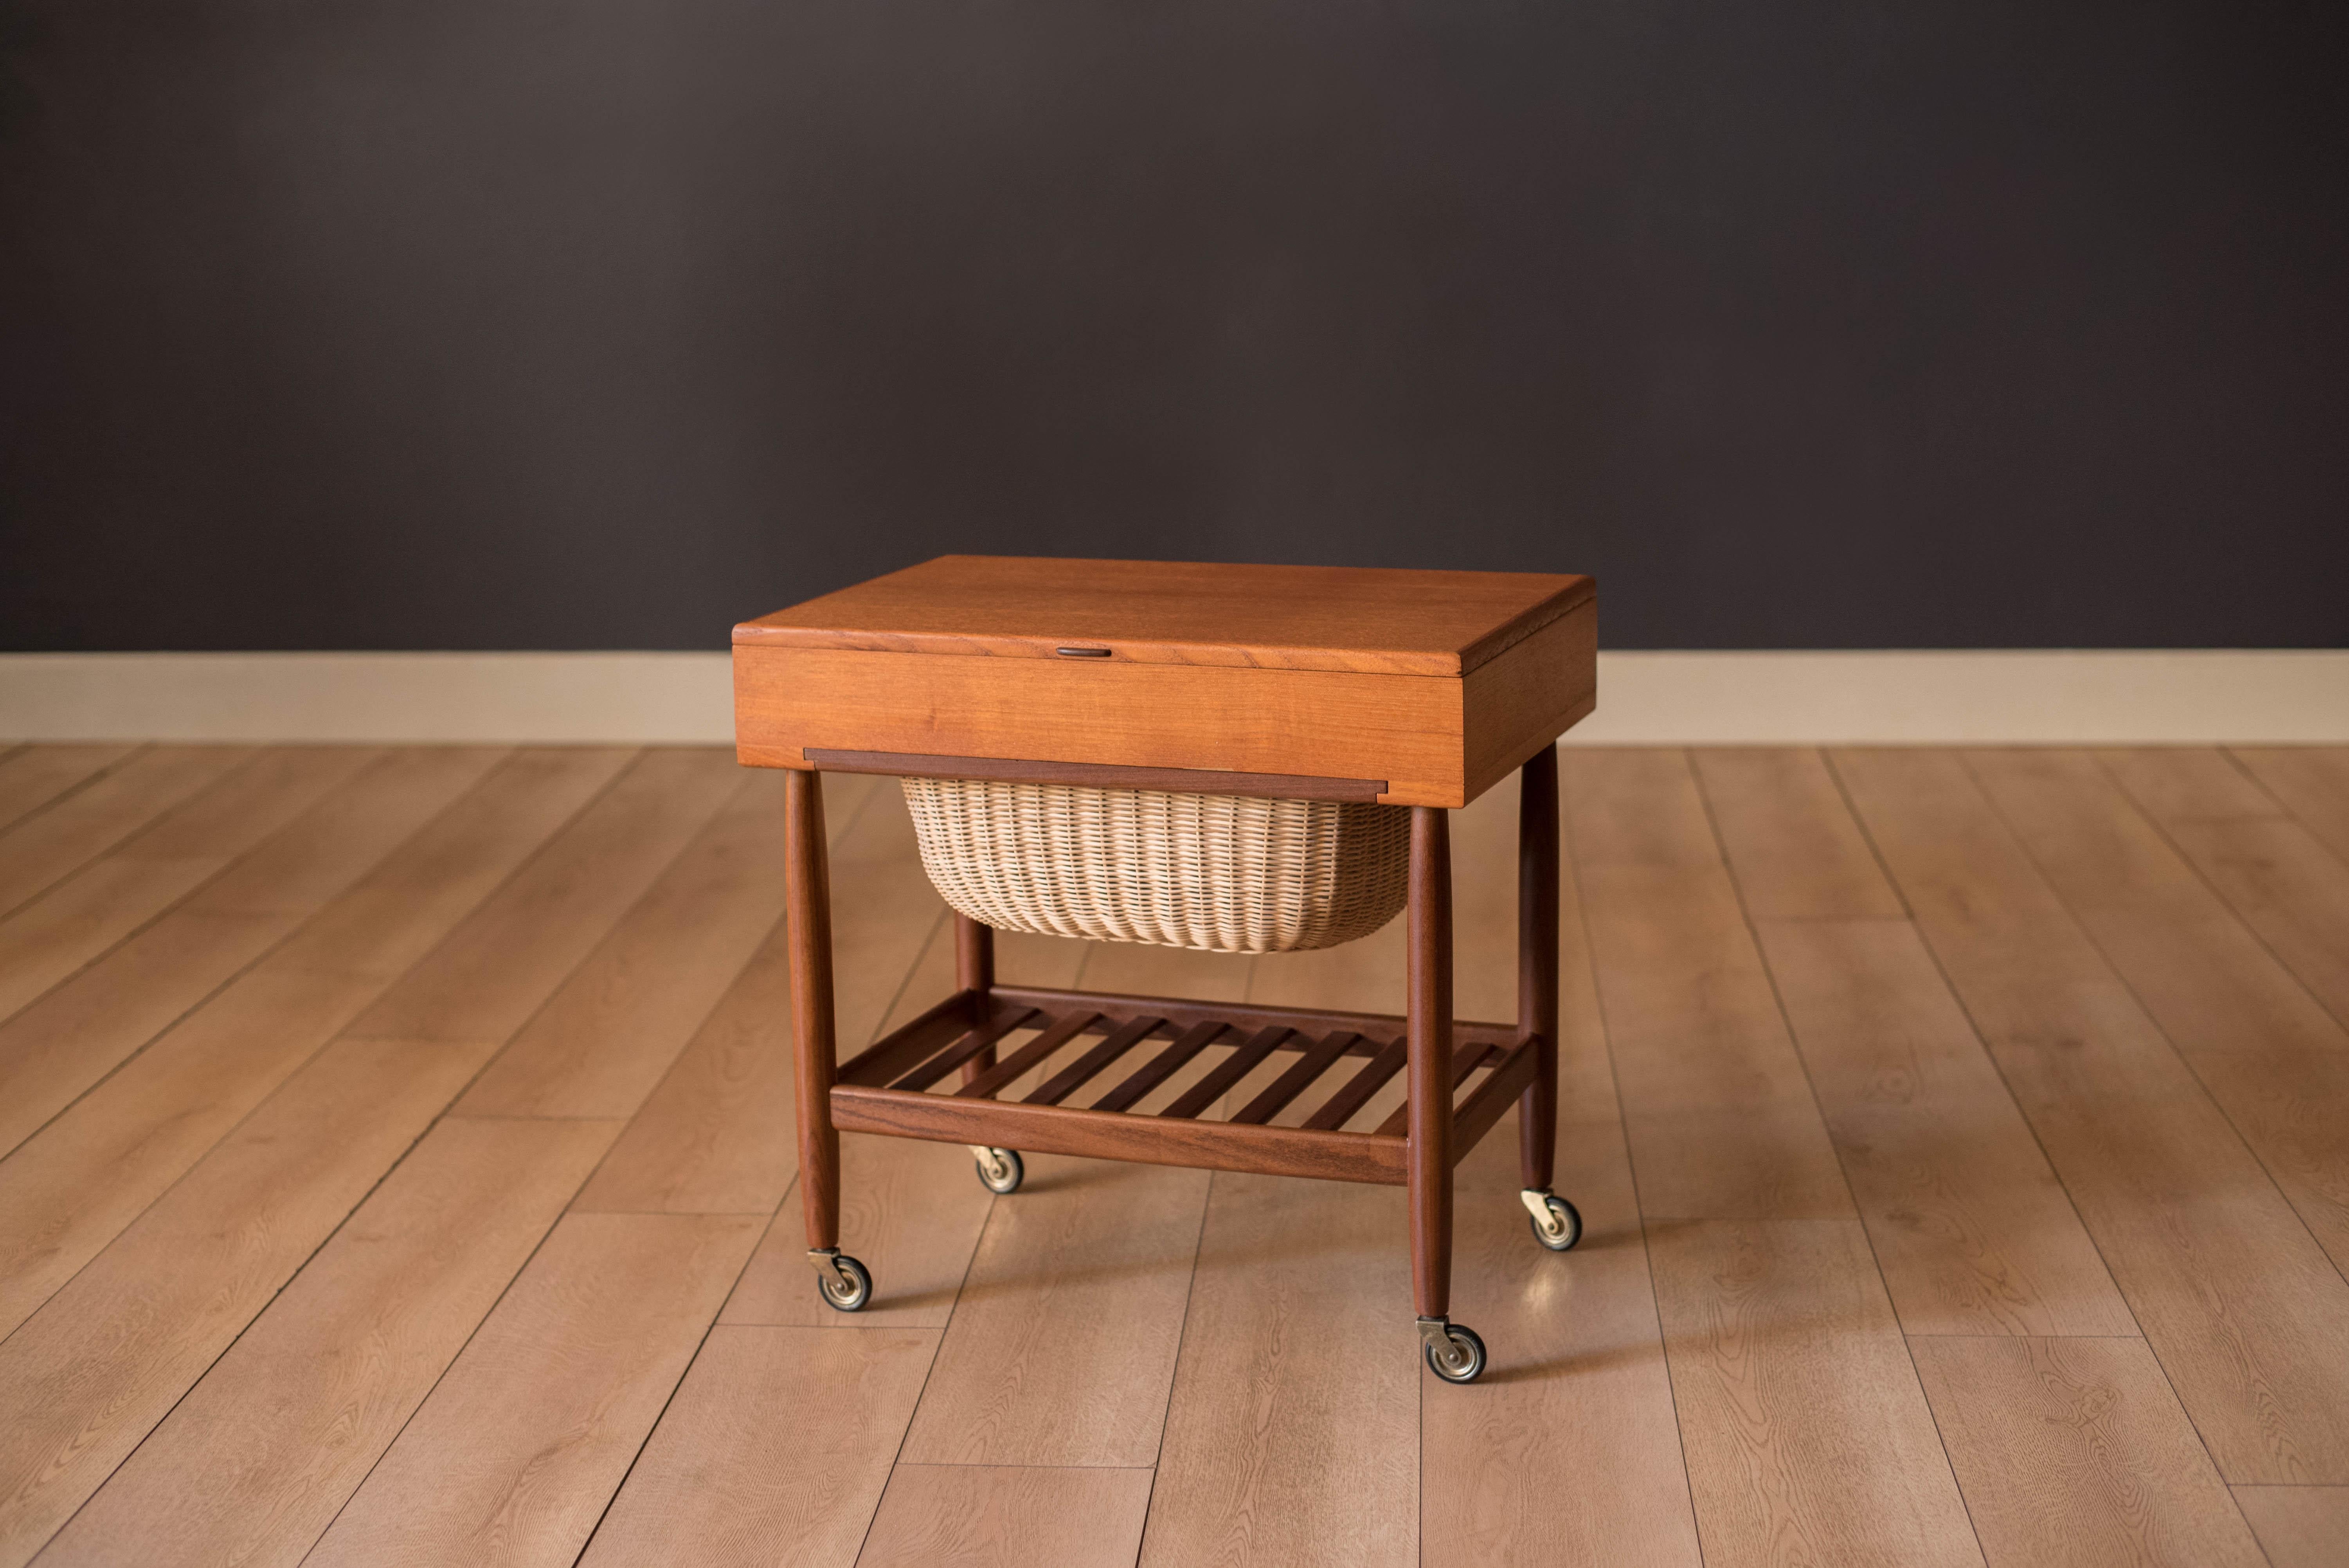 Mid century modern sewing end table in teak designed by Ejvind A. Johansson for FDB Mobler, Denmark. This two-tone piece is made with old growth teak featuring a storage organizing compartment with dividers, a seamless slide-out wicker basket tray,